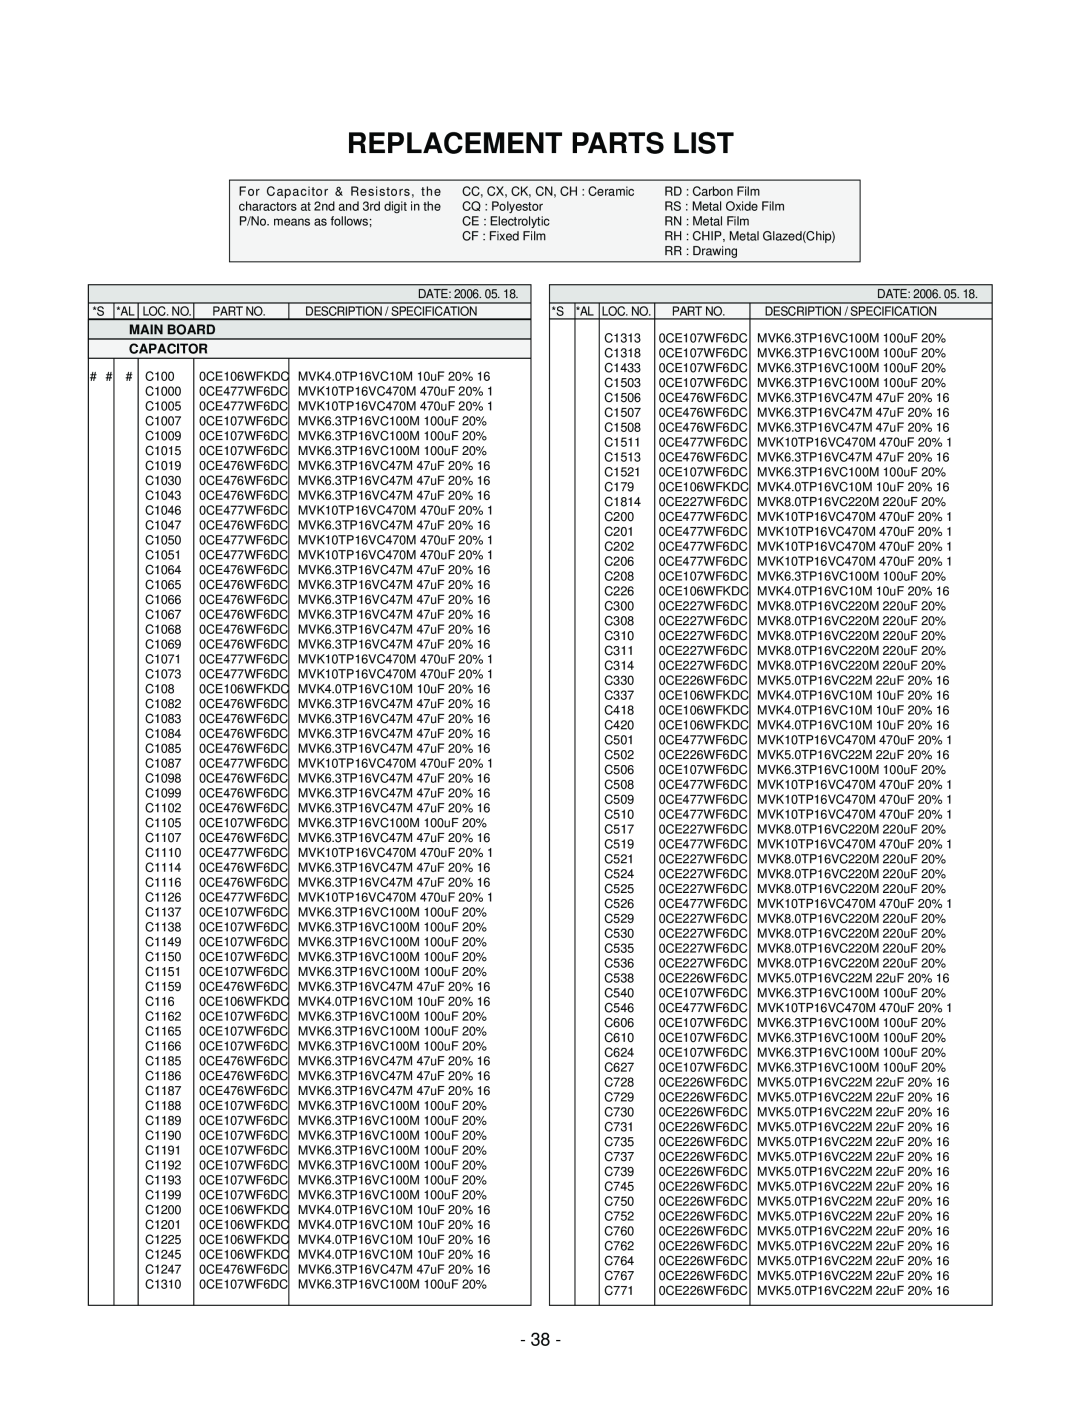 LG Electronics 42LC2D(B), 32LC2D(B), 37LC2D(B) service manual Replacement Parts List, Main Board, Capacitor 